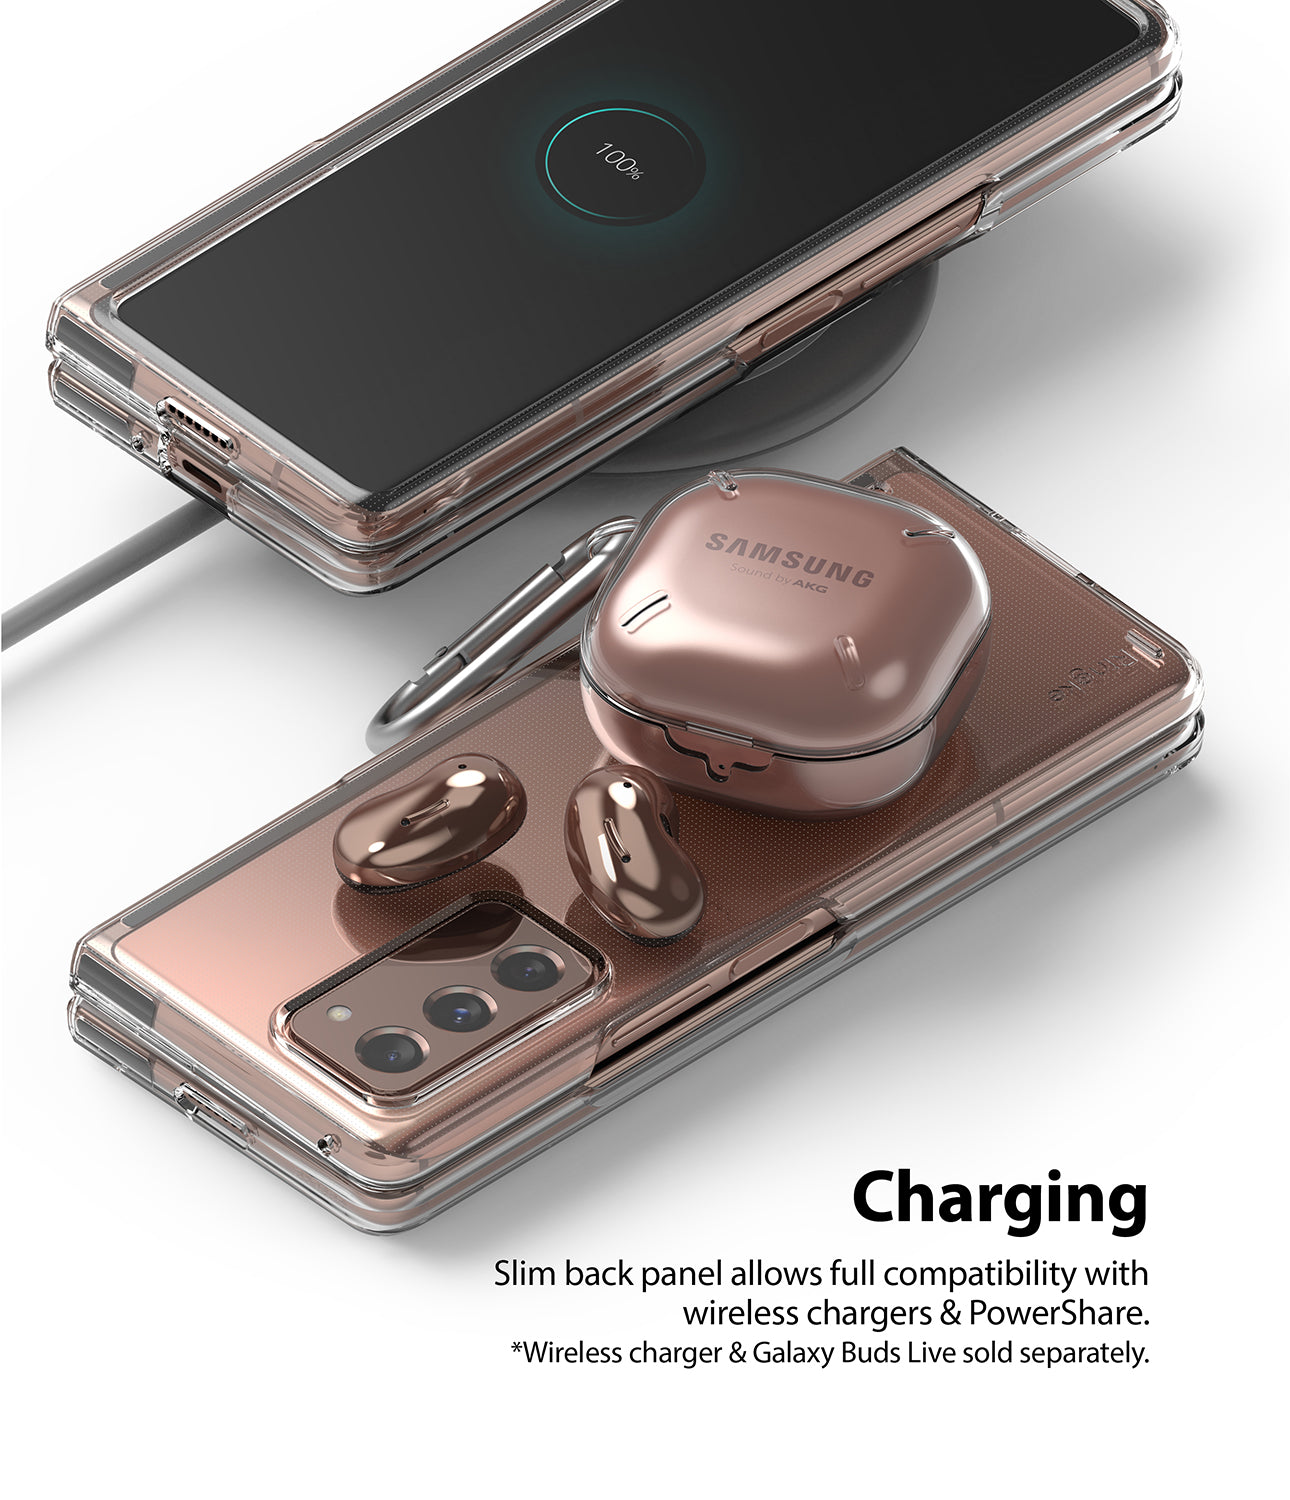 slim back panel enables wireless charging and powershare compatiibility